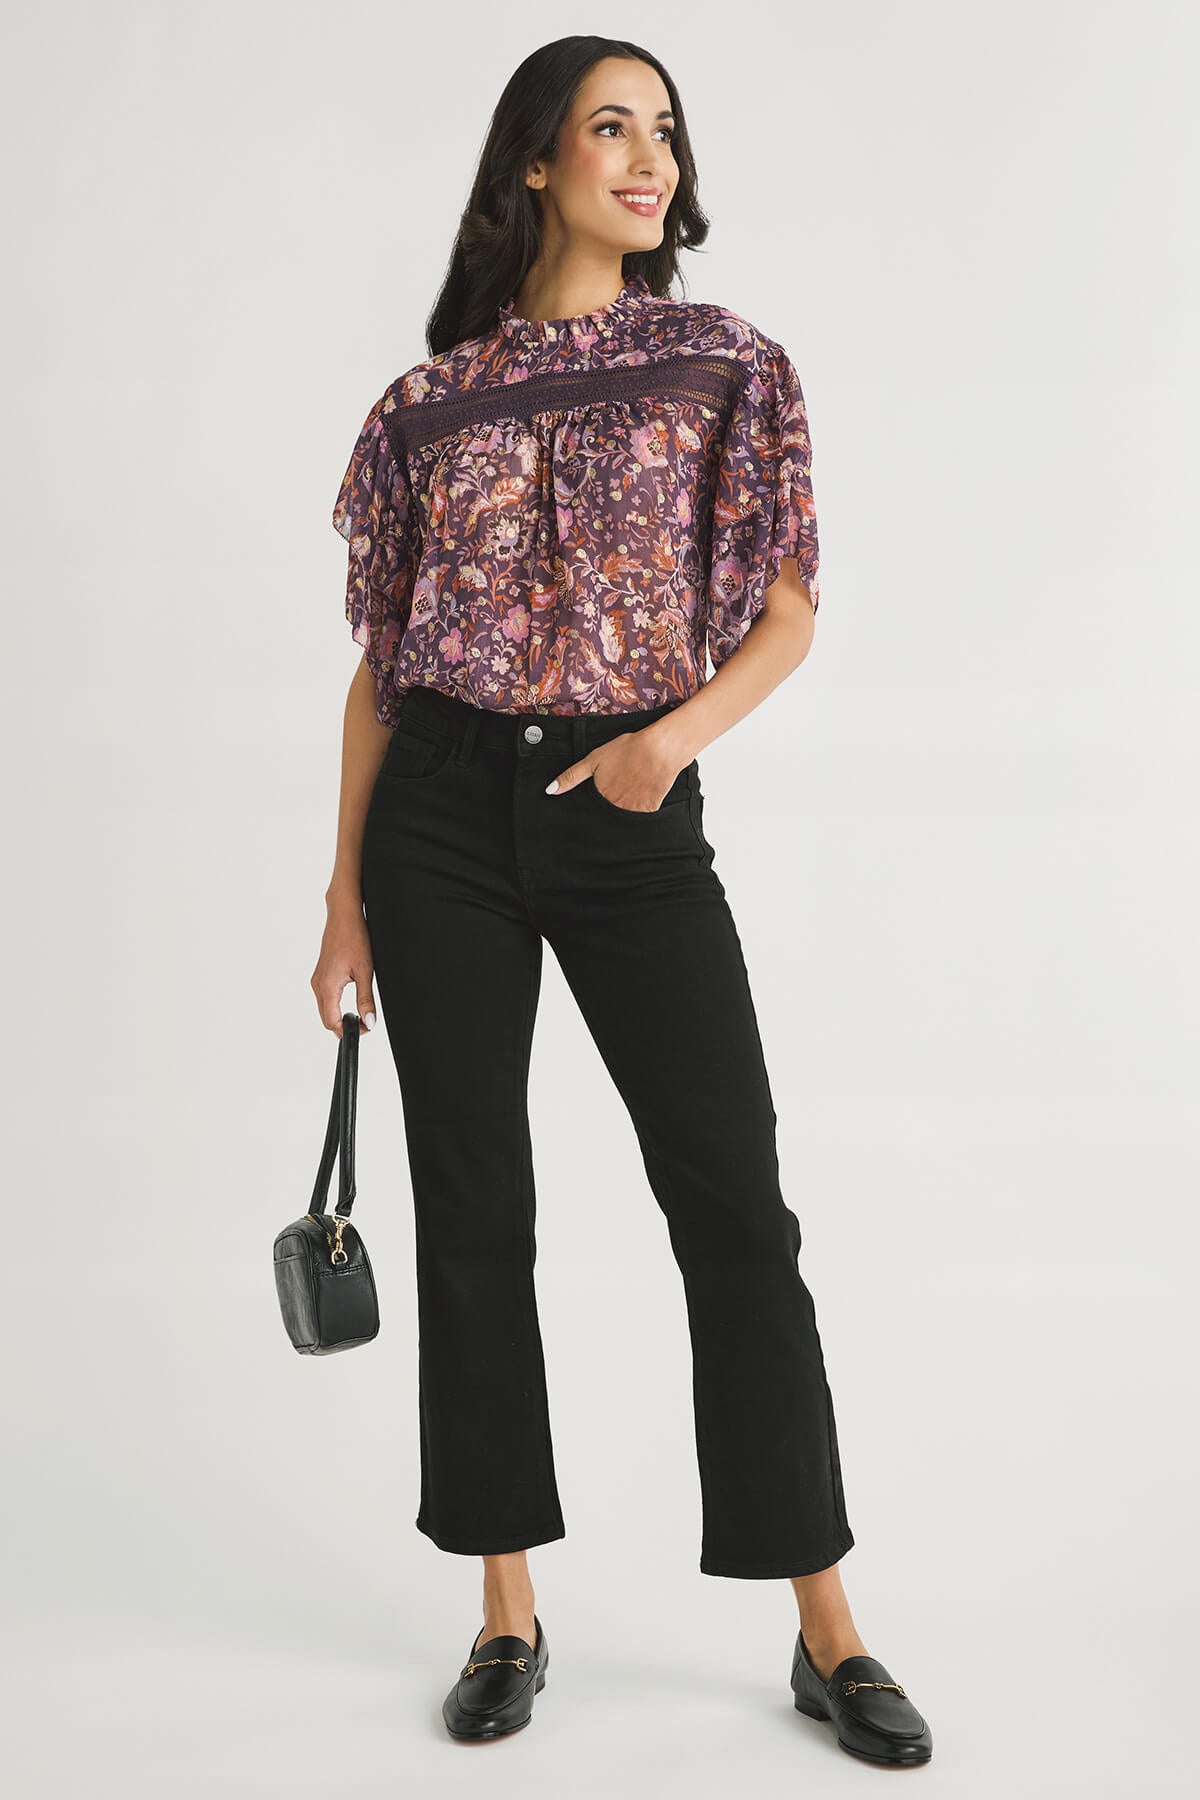 Olivaceous Sally Top